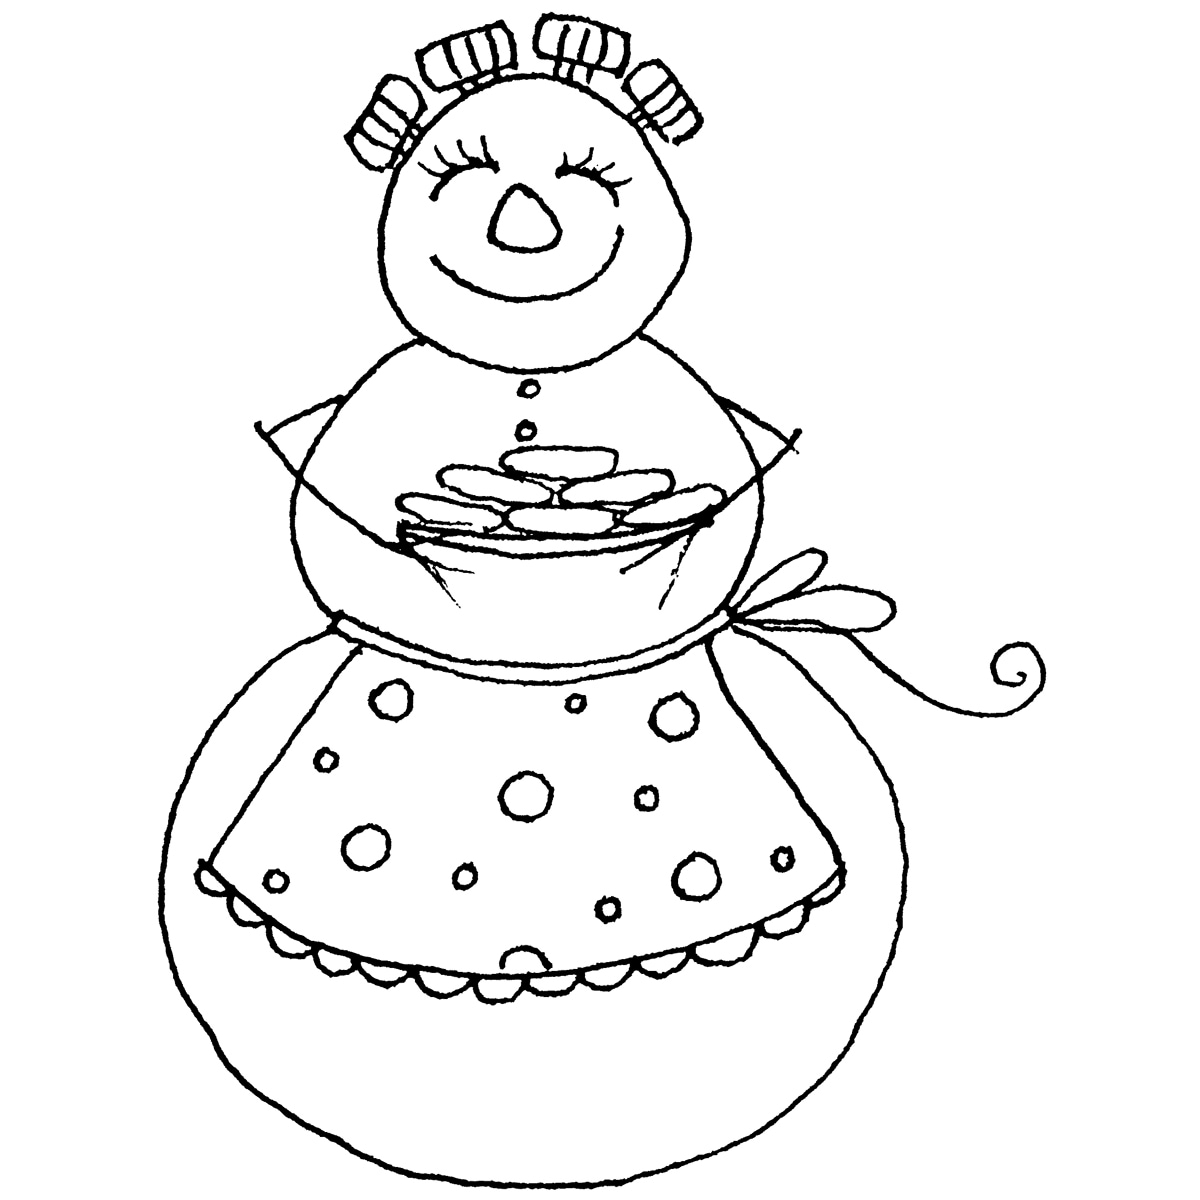 Penny Black Christmas Cookies Rubber Stamp